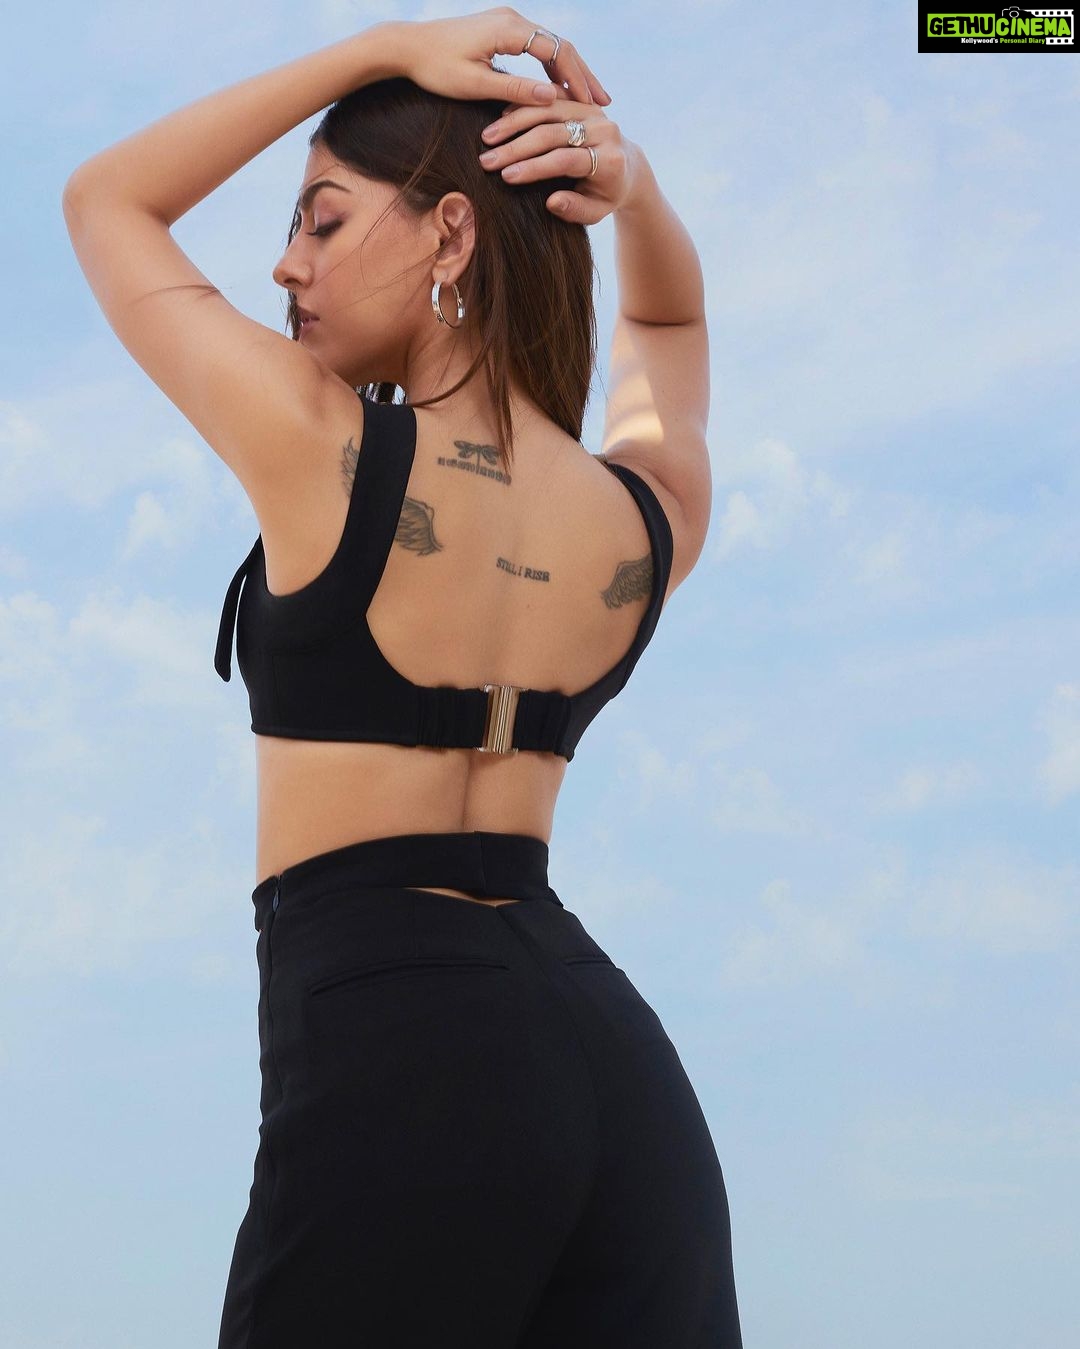 For Studio, street and beyond⚡️ USA's hottest activewear brand